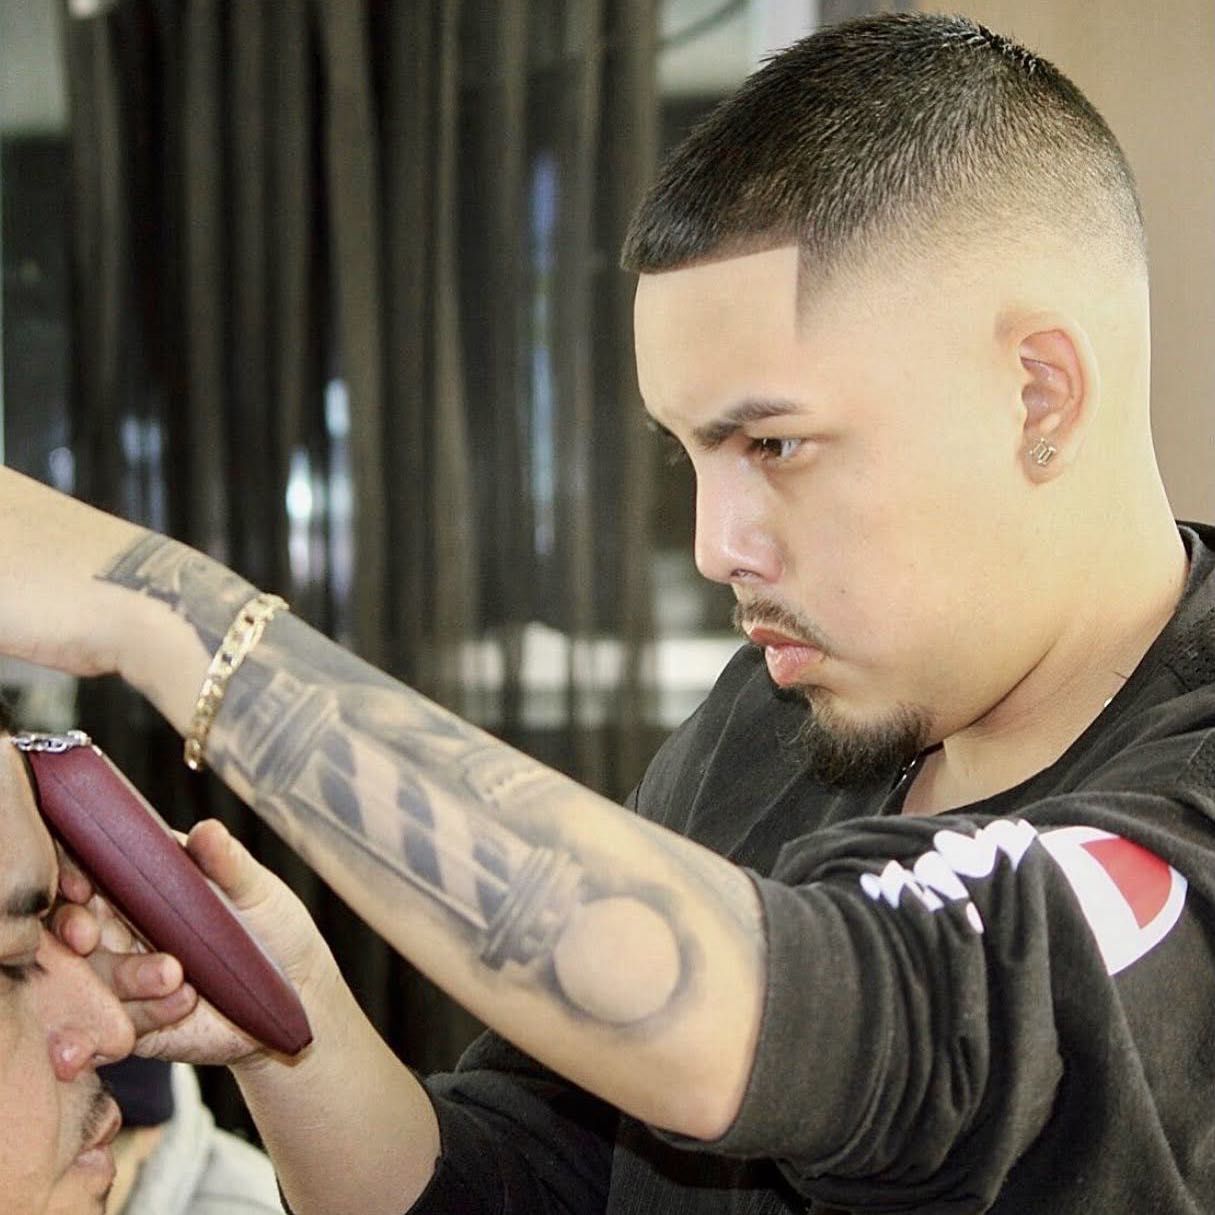 Rudy The Barber @Traditions 51st, 3435 W. 51st, Chicago, 60632